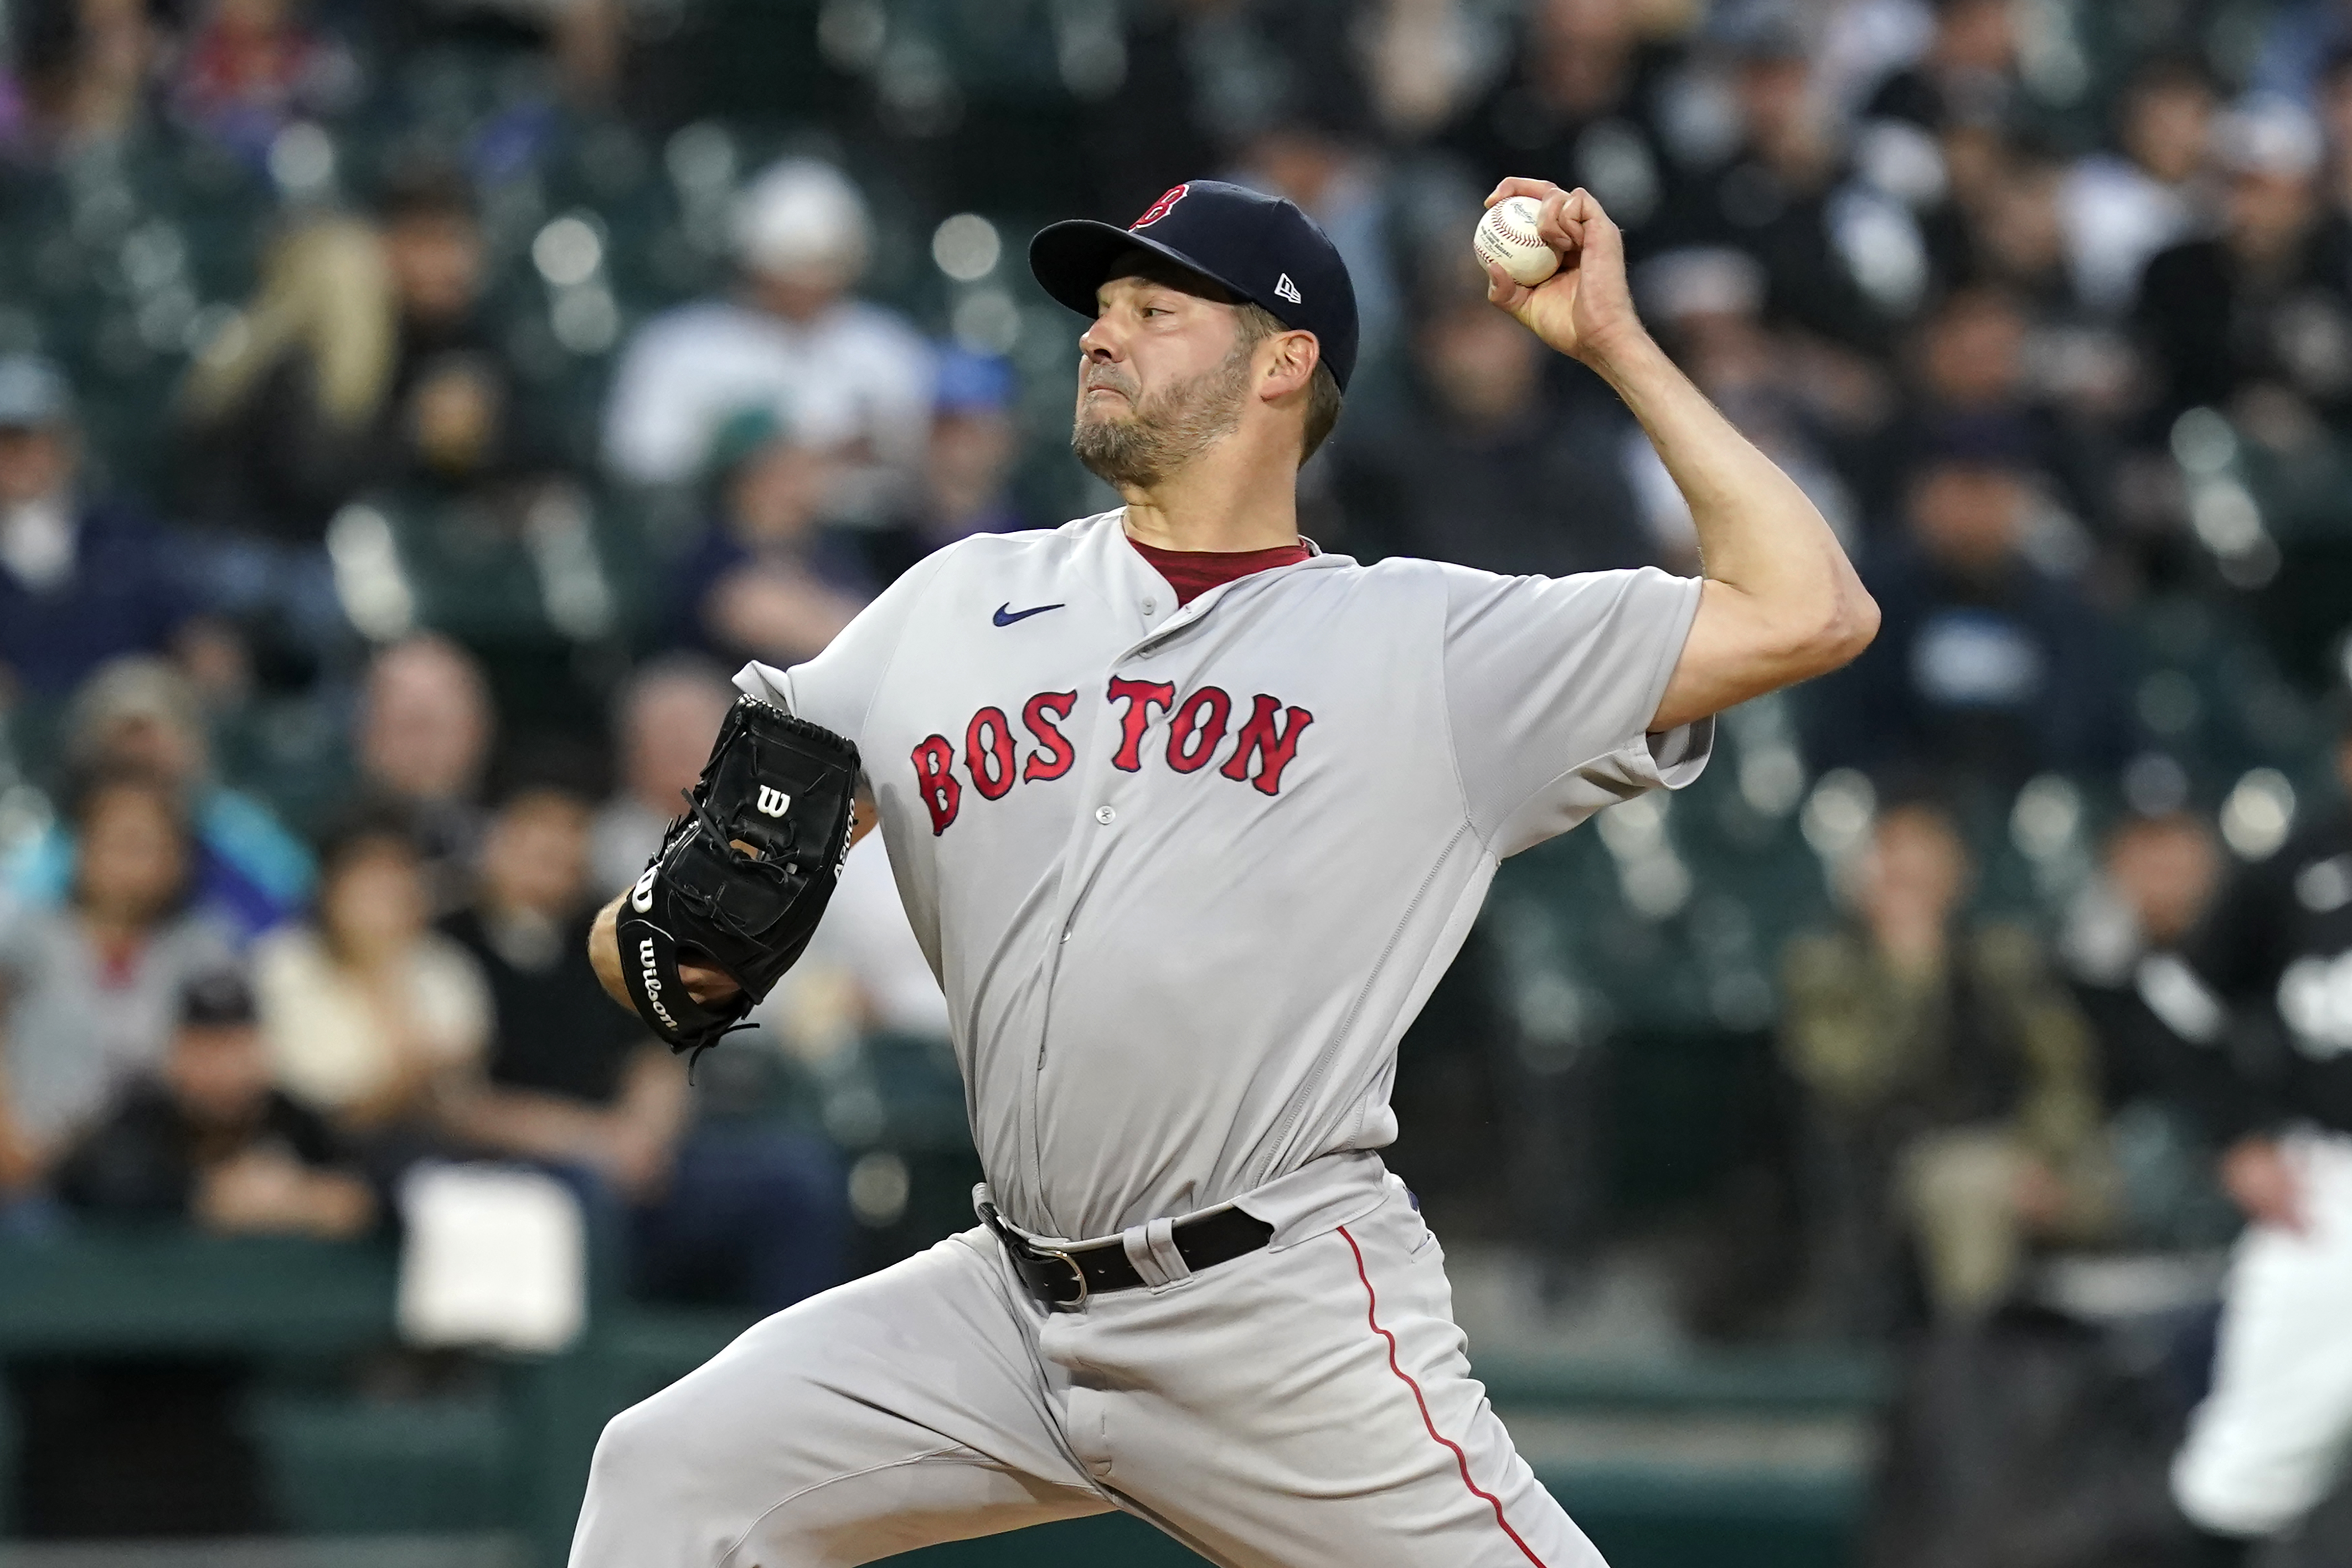 Rich Hill does it all in Players' Weekend rout